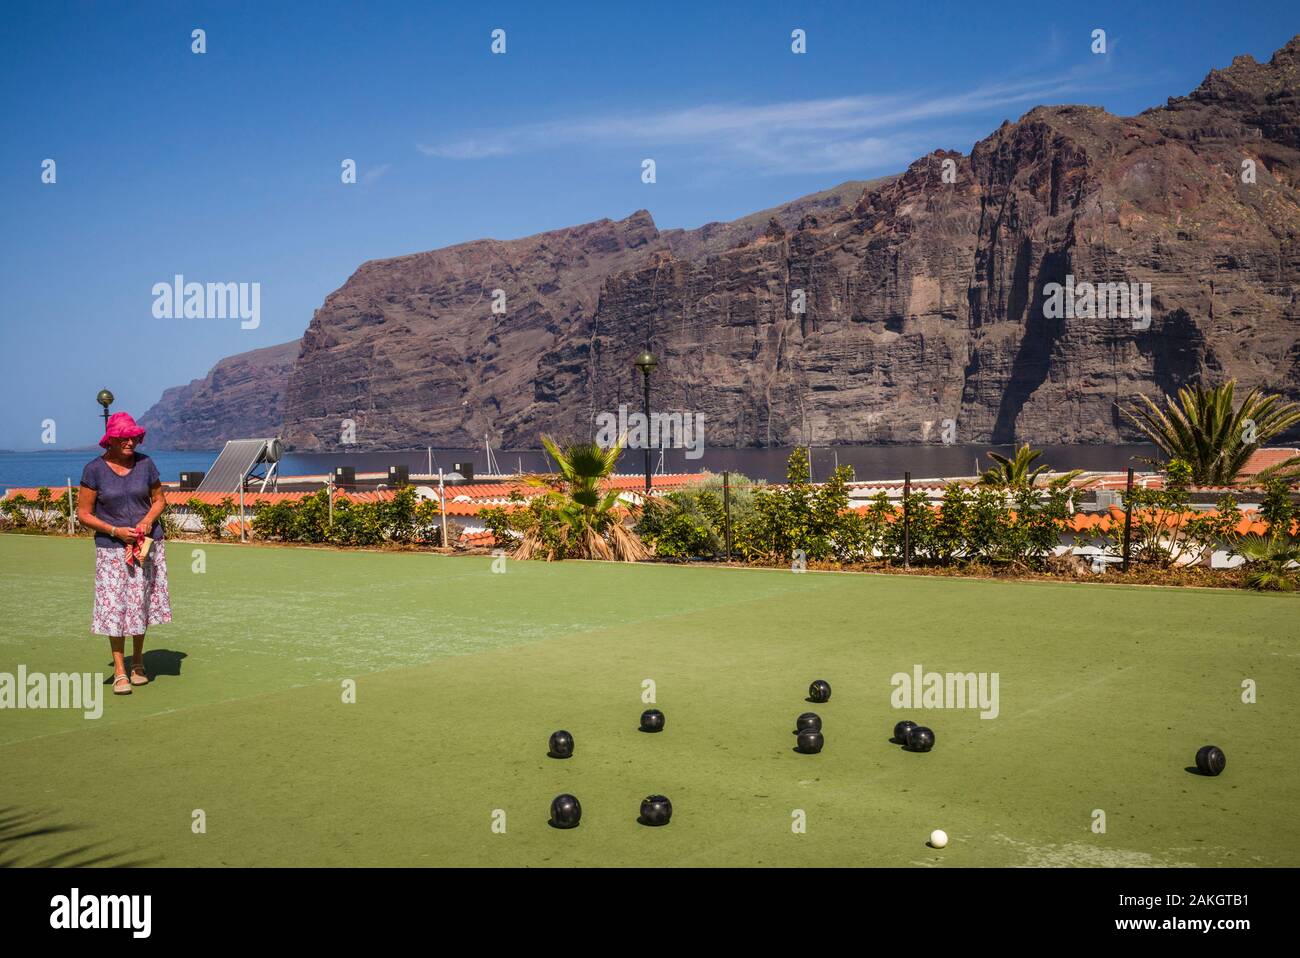 Spain, Canary Islands, Tenerife Island, Los Gigantes, lawn bowling with players Stock Photo